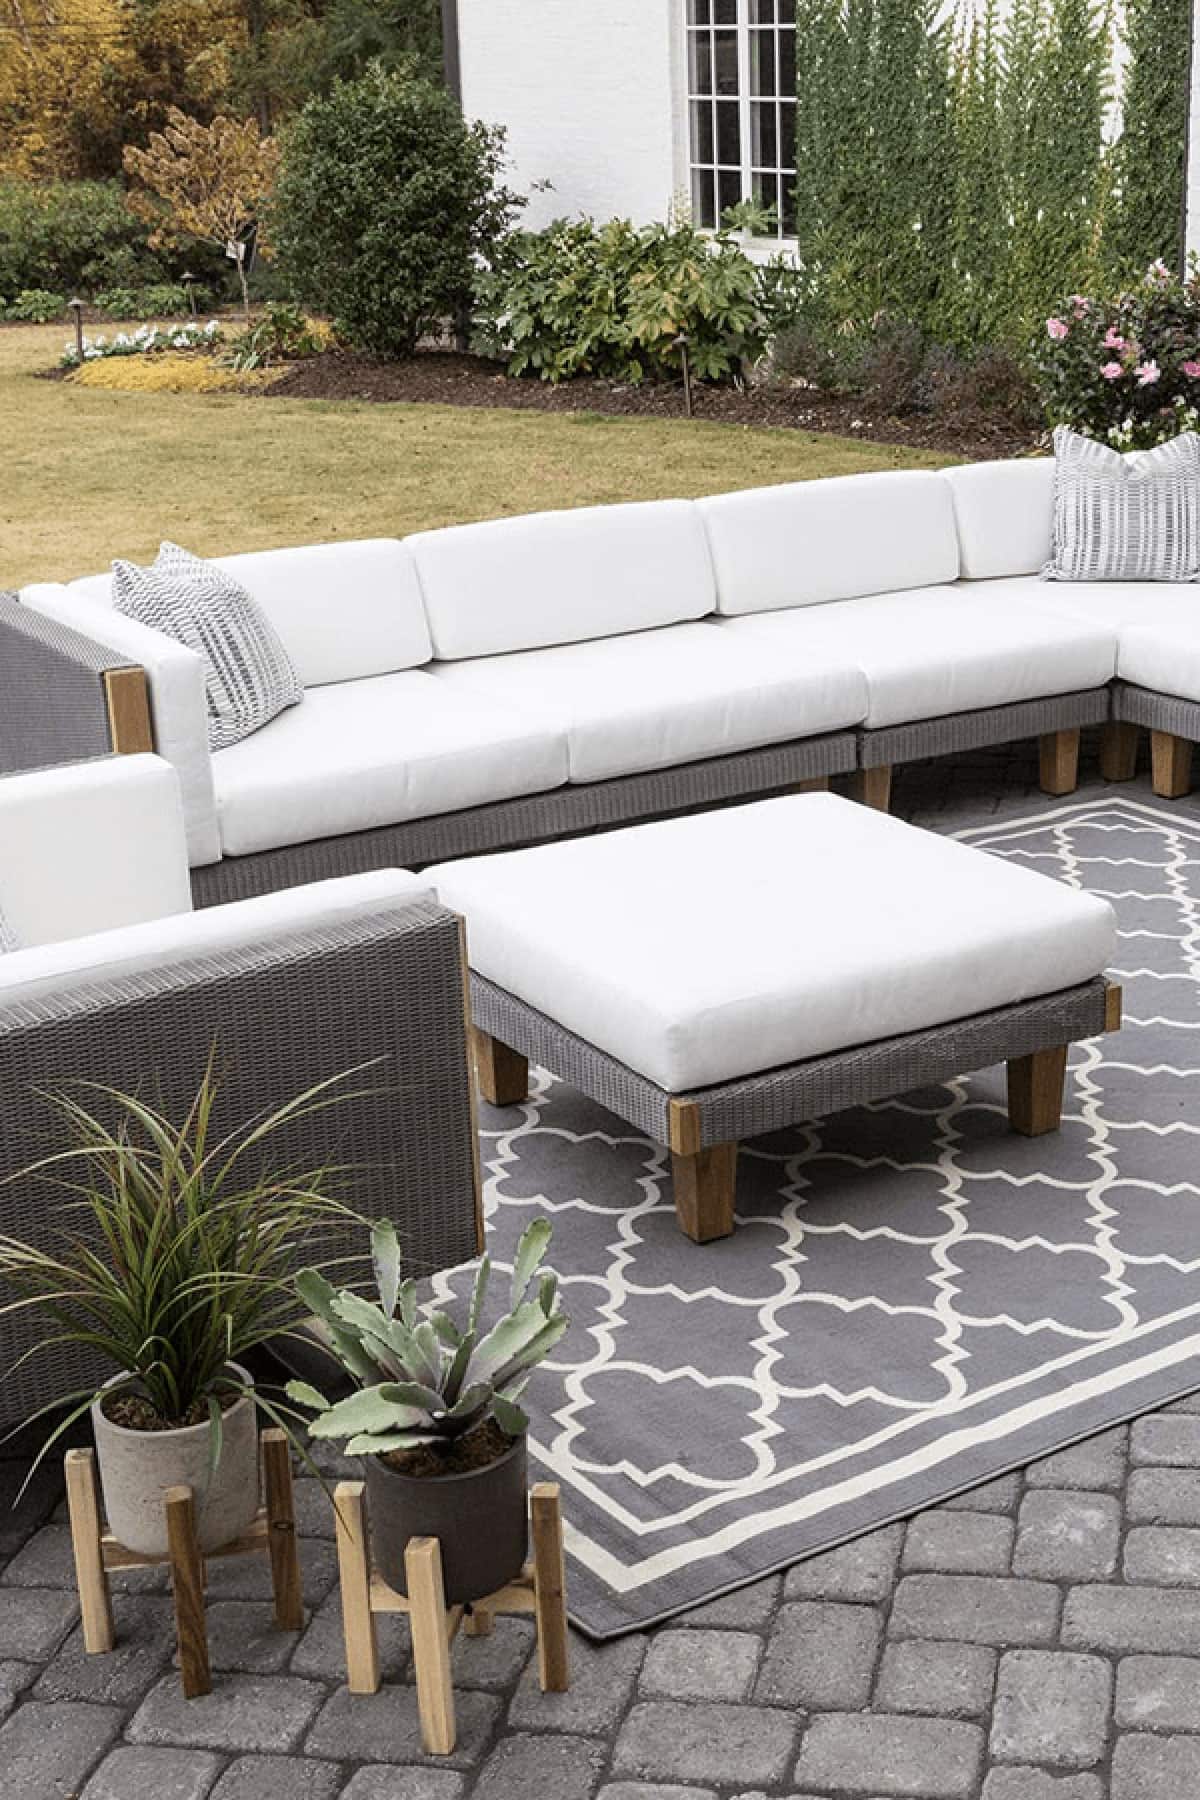 What's trending in outdoor furniture and patio decor